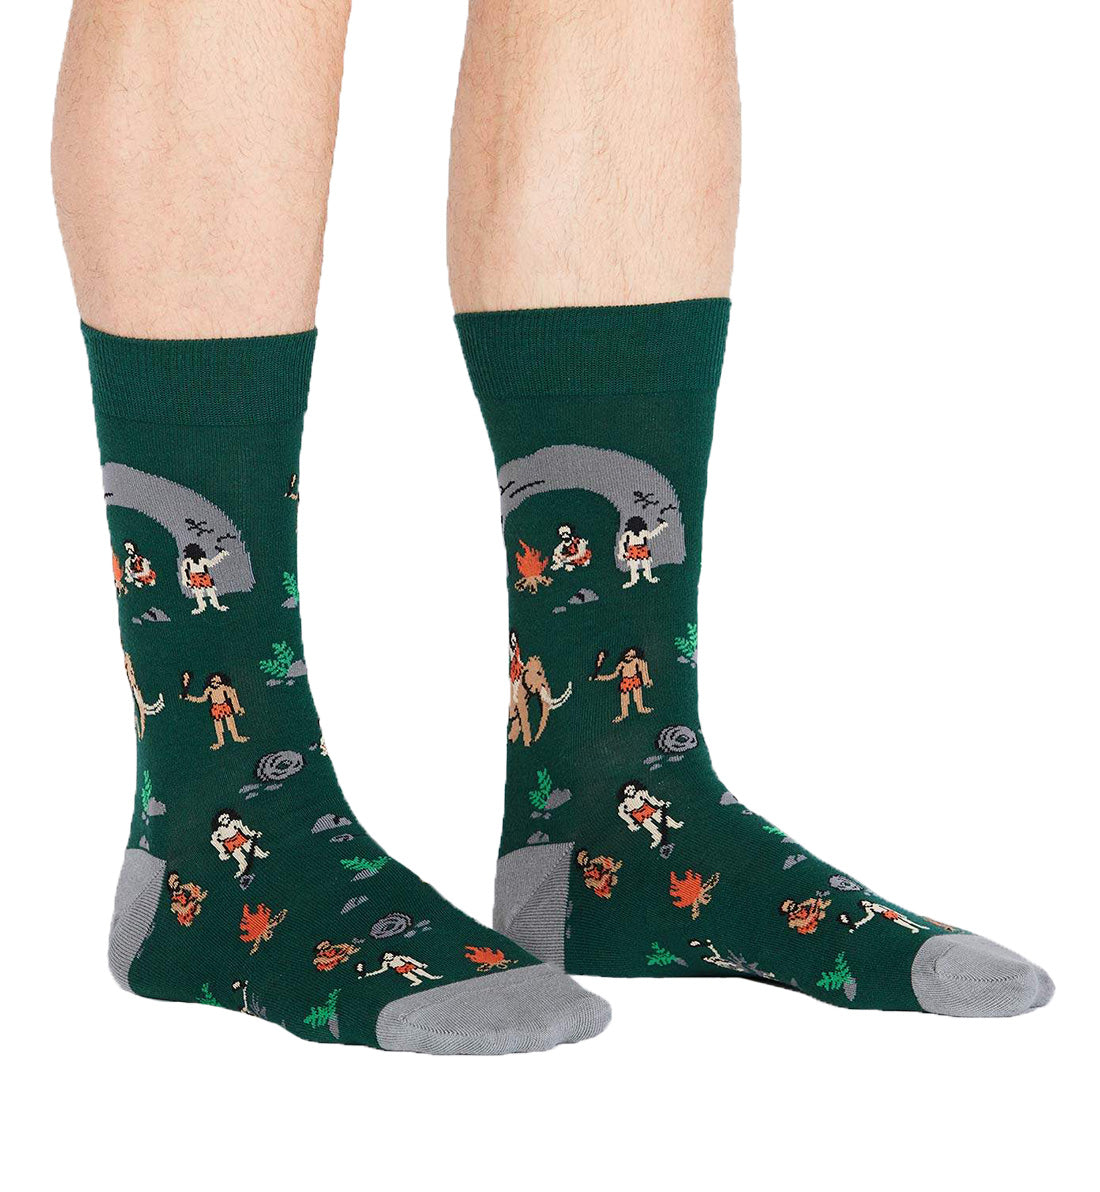 SOCK it to me Men&#39;s Crew Socks (mef0323),Man Cave - Man Cave,One Size